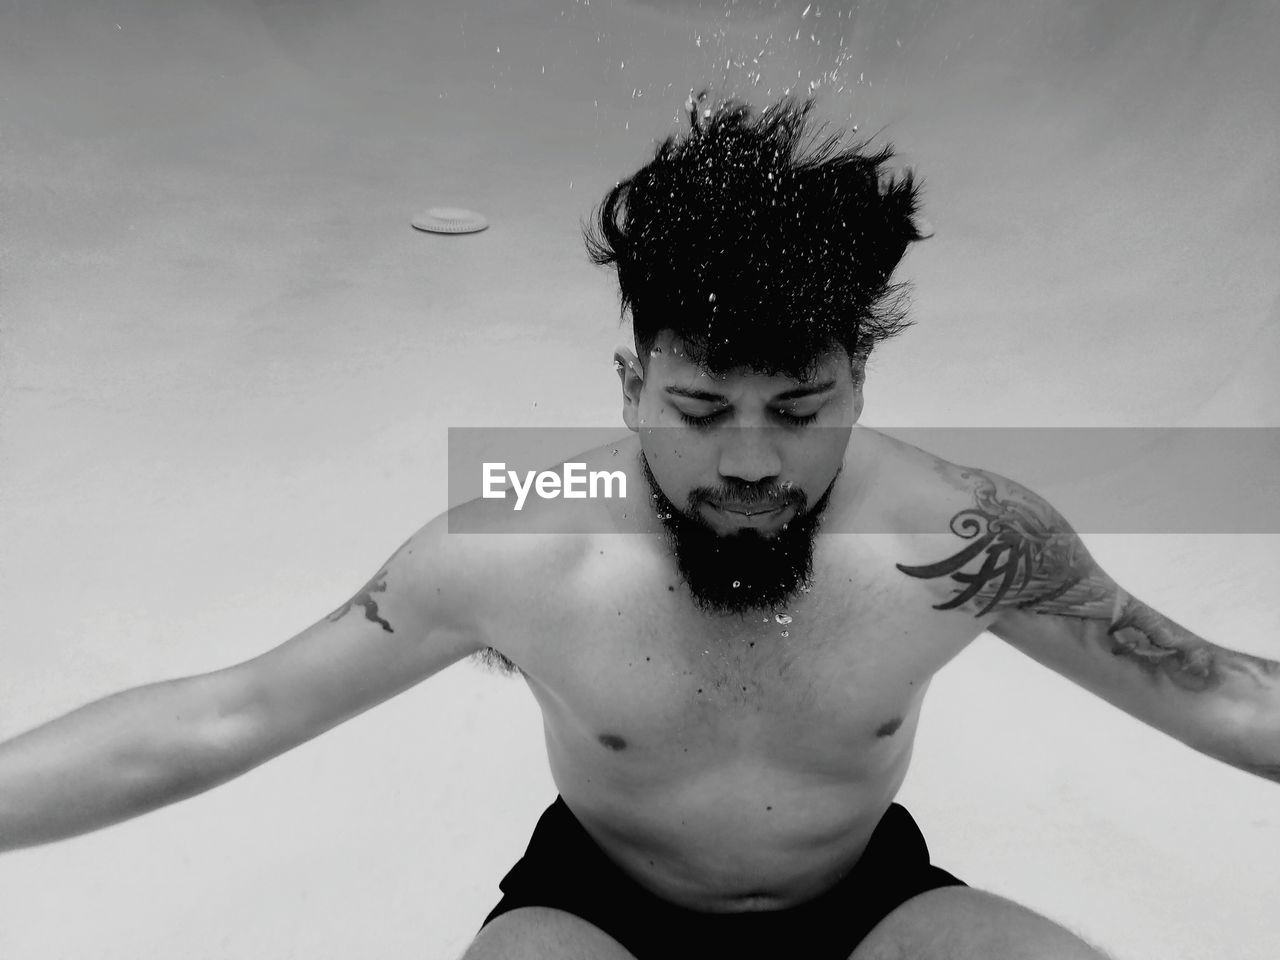 Man with tattoos swimming underwater